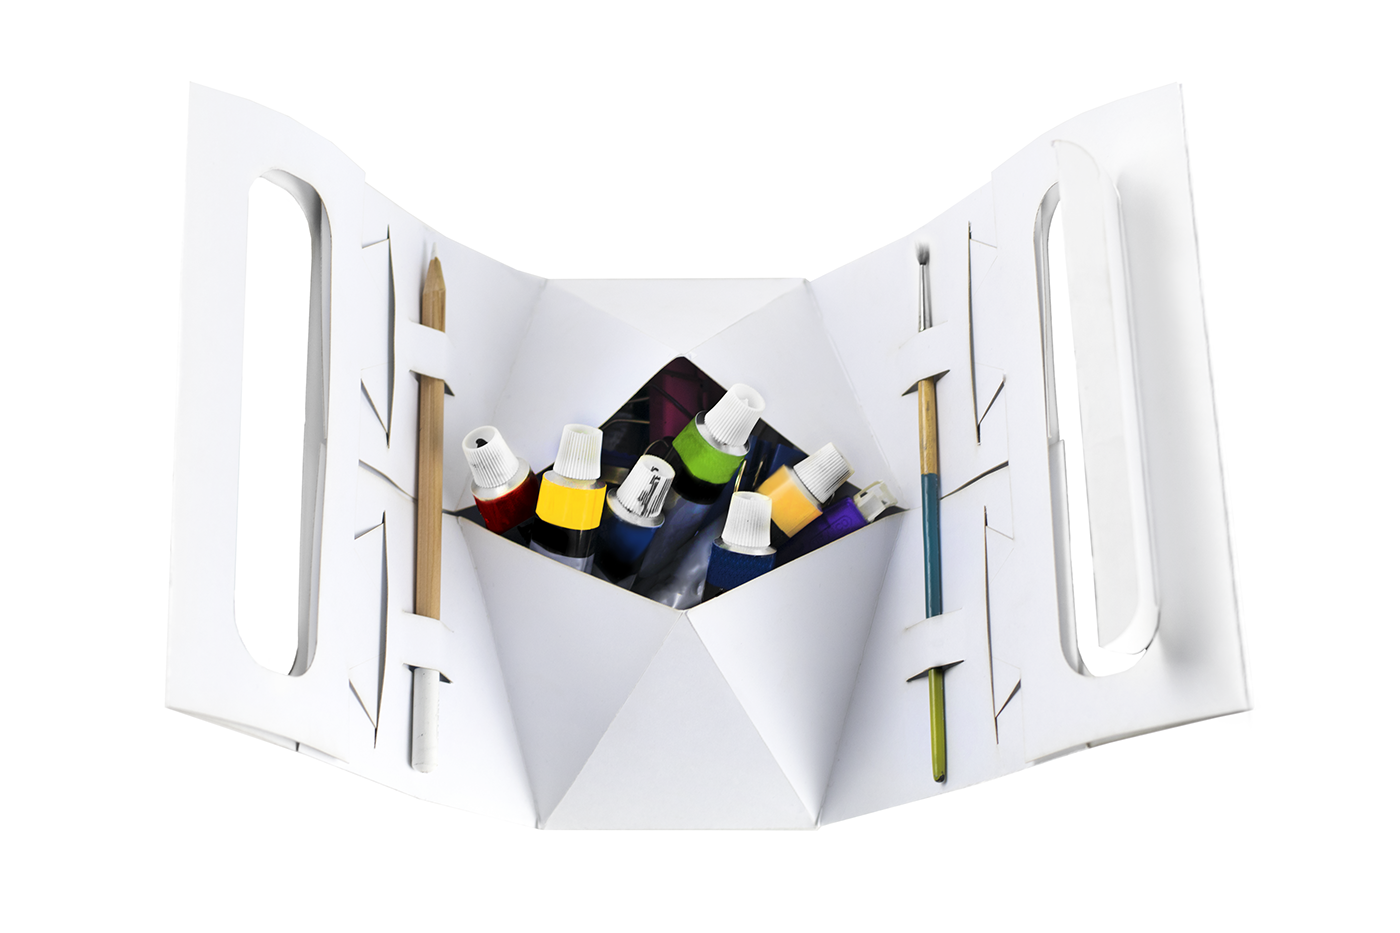 ysdn package design Handler paper No adhesive collapsable mechanism adobeawards